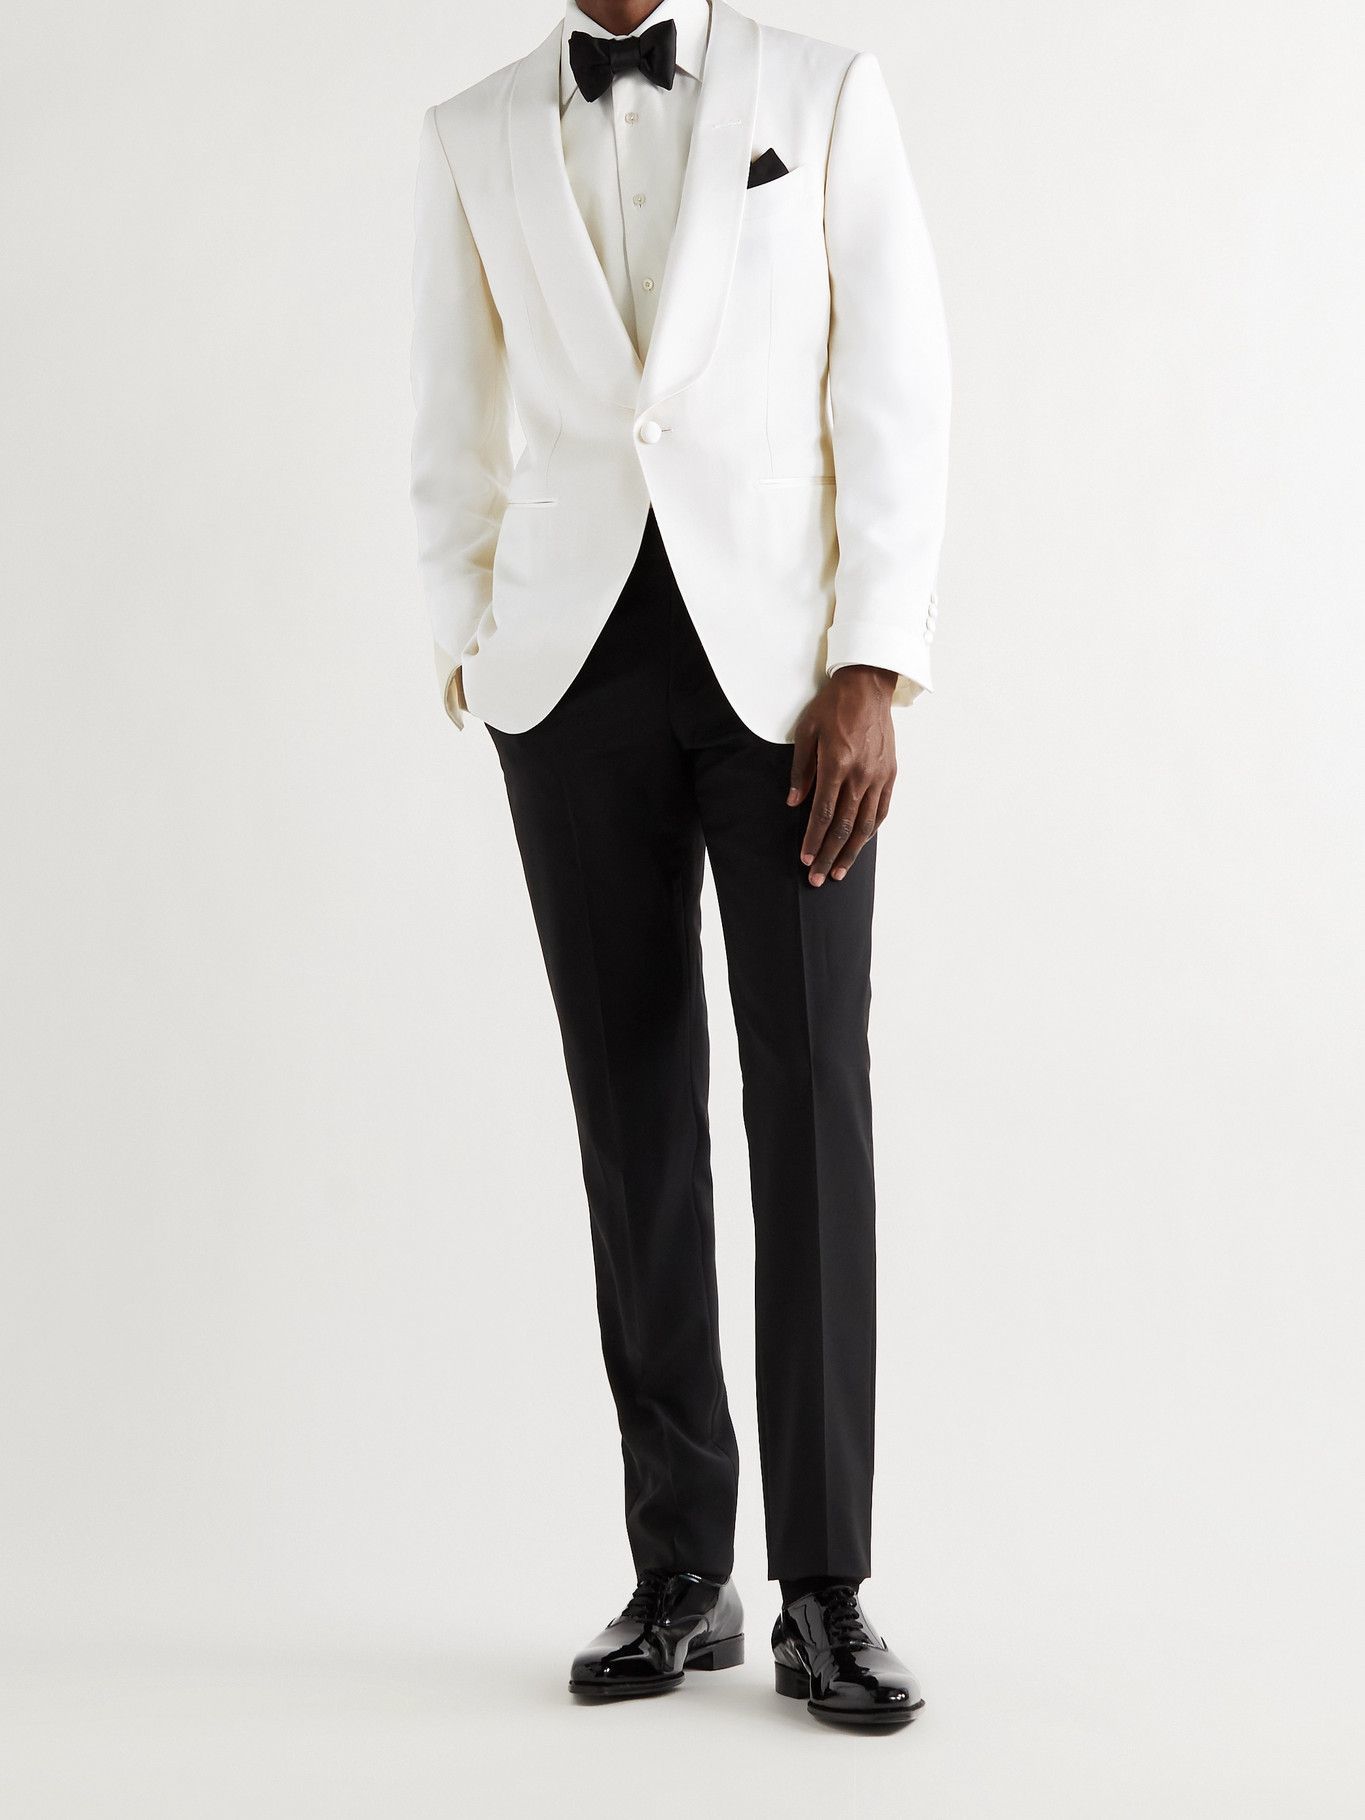 TOM FORD - O'Connor Slim-Fit Satin-Trimmed Wool and Mohair-Blend Tuxedo  Jacket - White TOM FORD